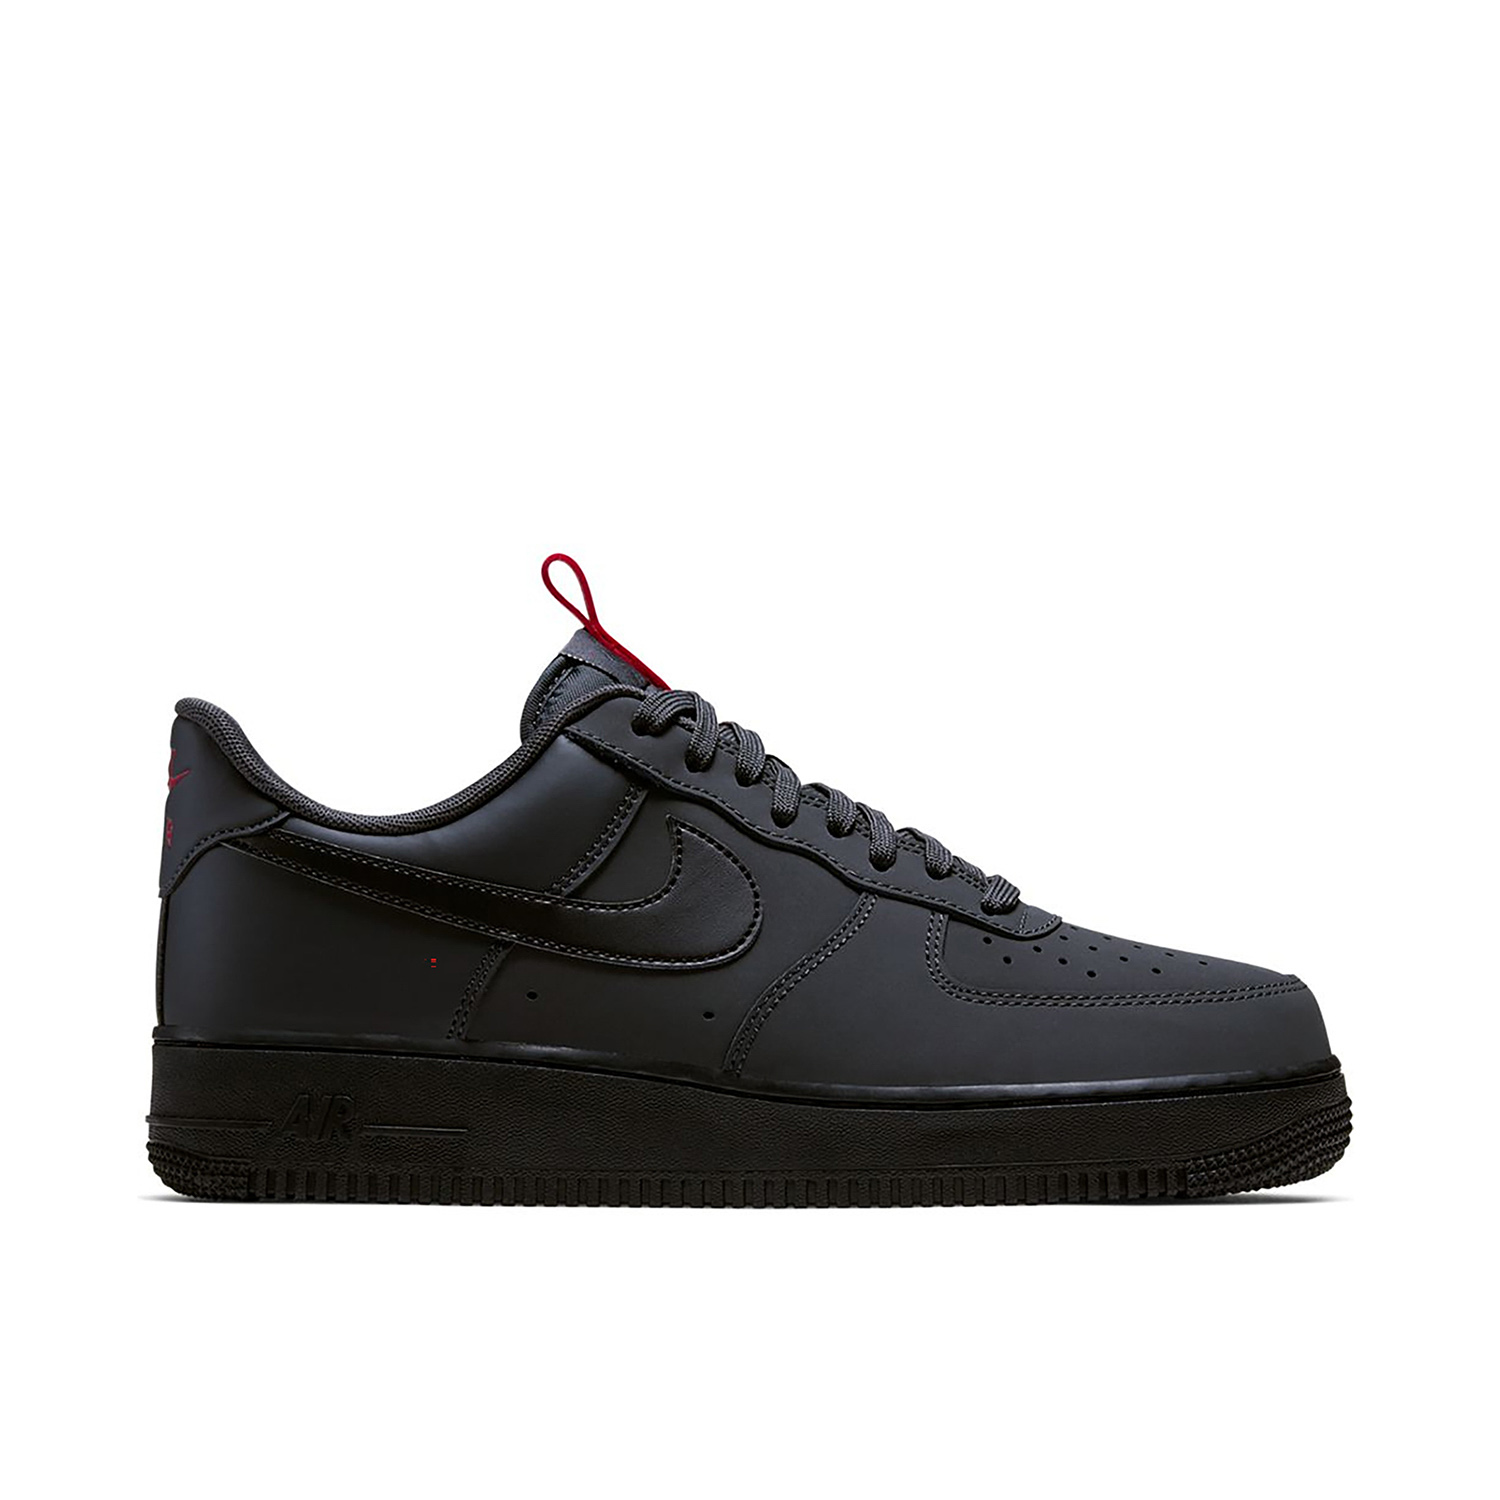 Europa Catastrofaal vloot Nike Air Force 1 Low Anthracite | BQ4326-001 | Laced